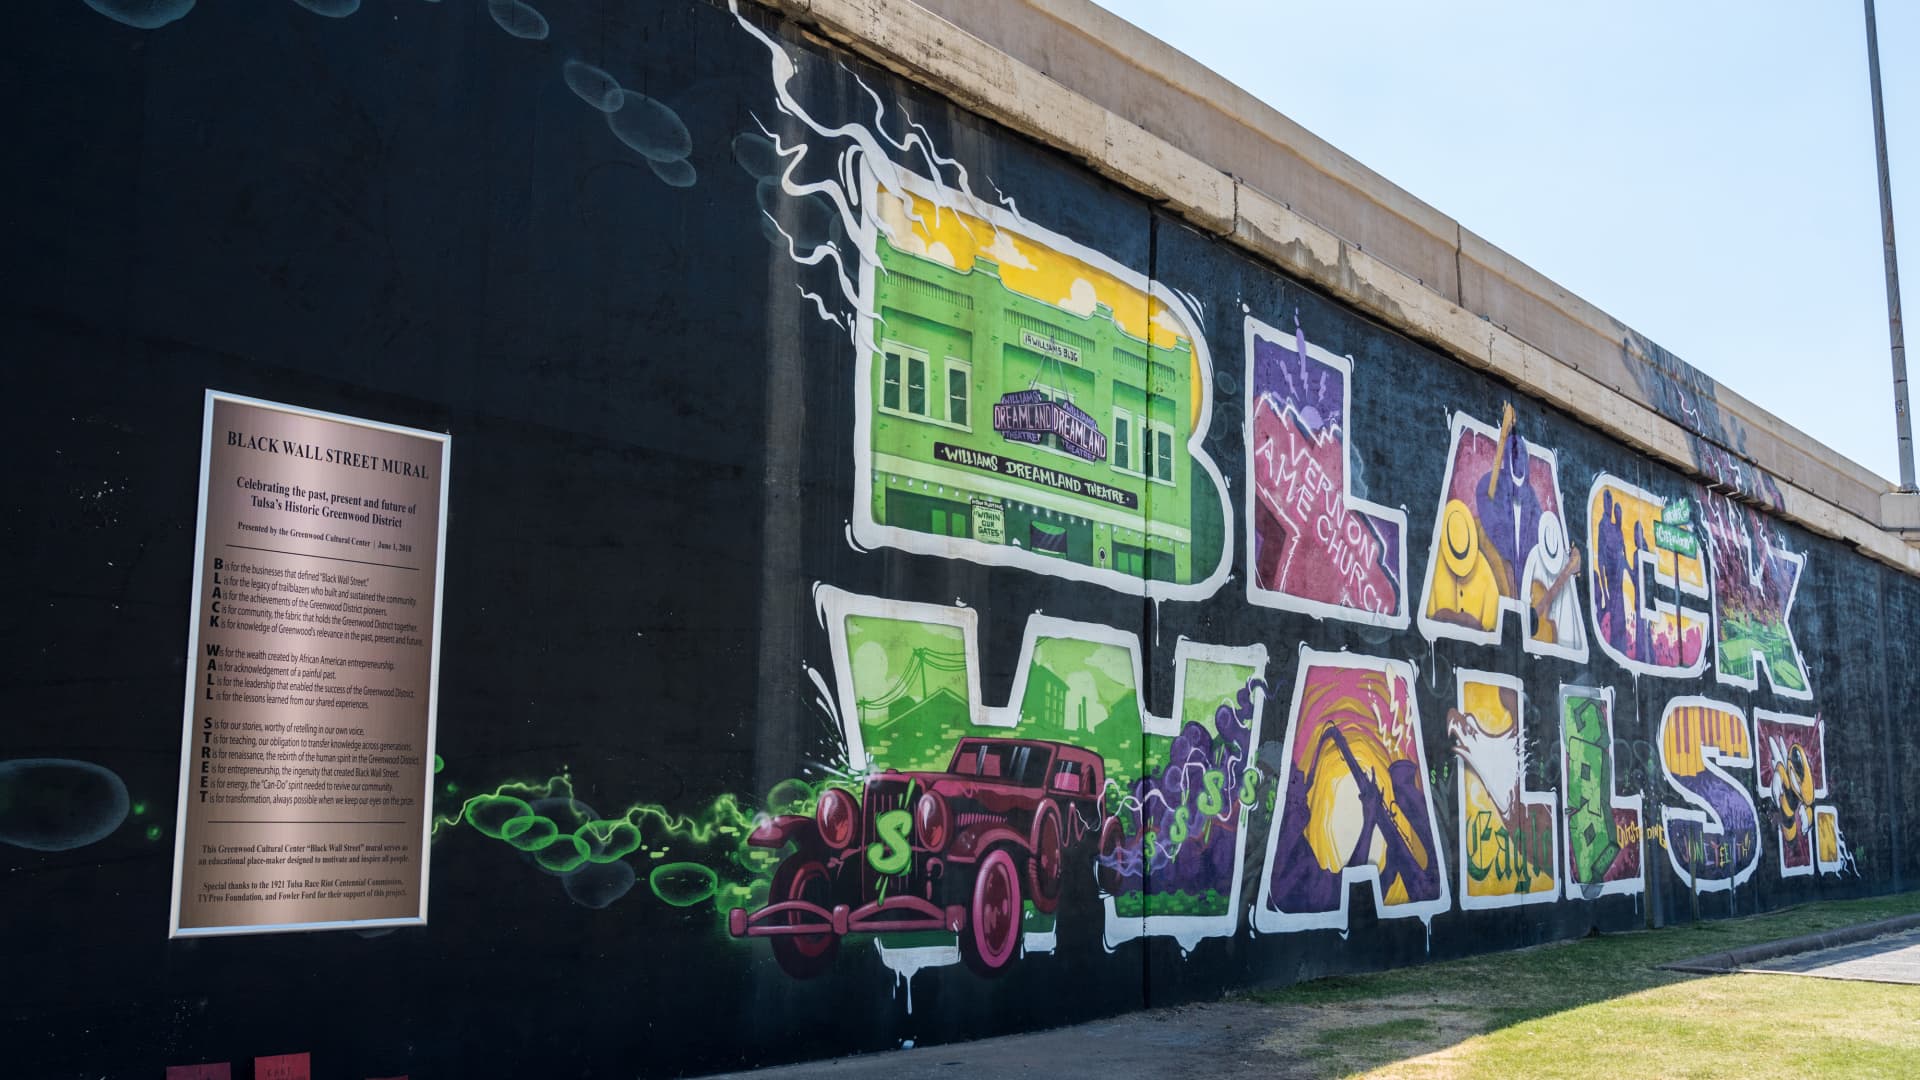 The Black Wall Street Mural in the Greenwood district of Tulsa, Oklahoma, on Friday, June 19, 2020. Greenwood, known as Black Wall Street, was one of the most prosperous African-American enclaves in the U.S. before it was burned down by a white mob in 1921.